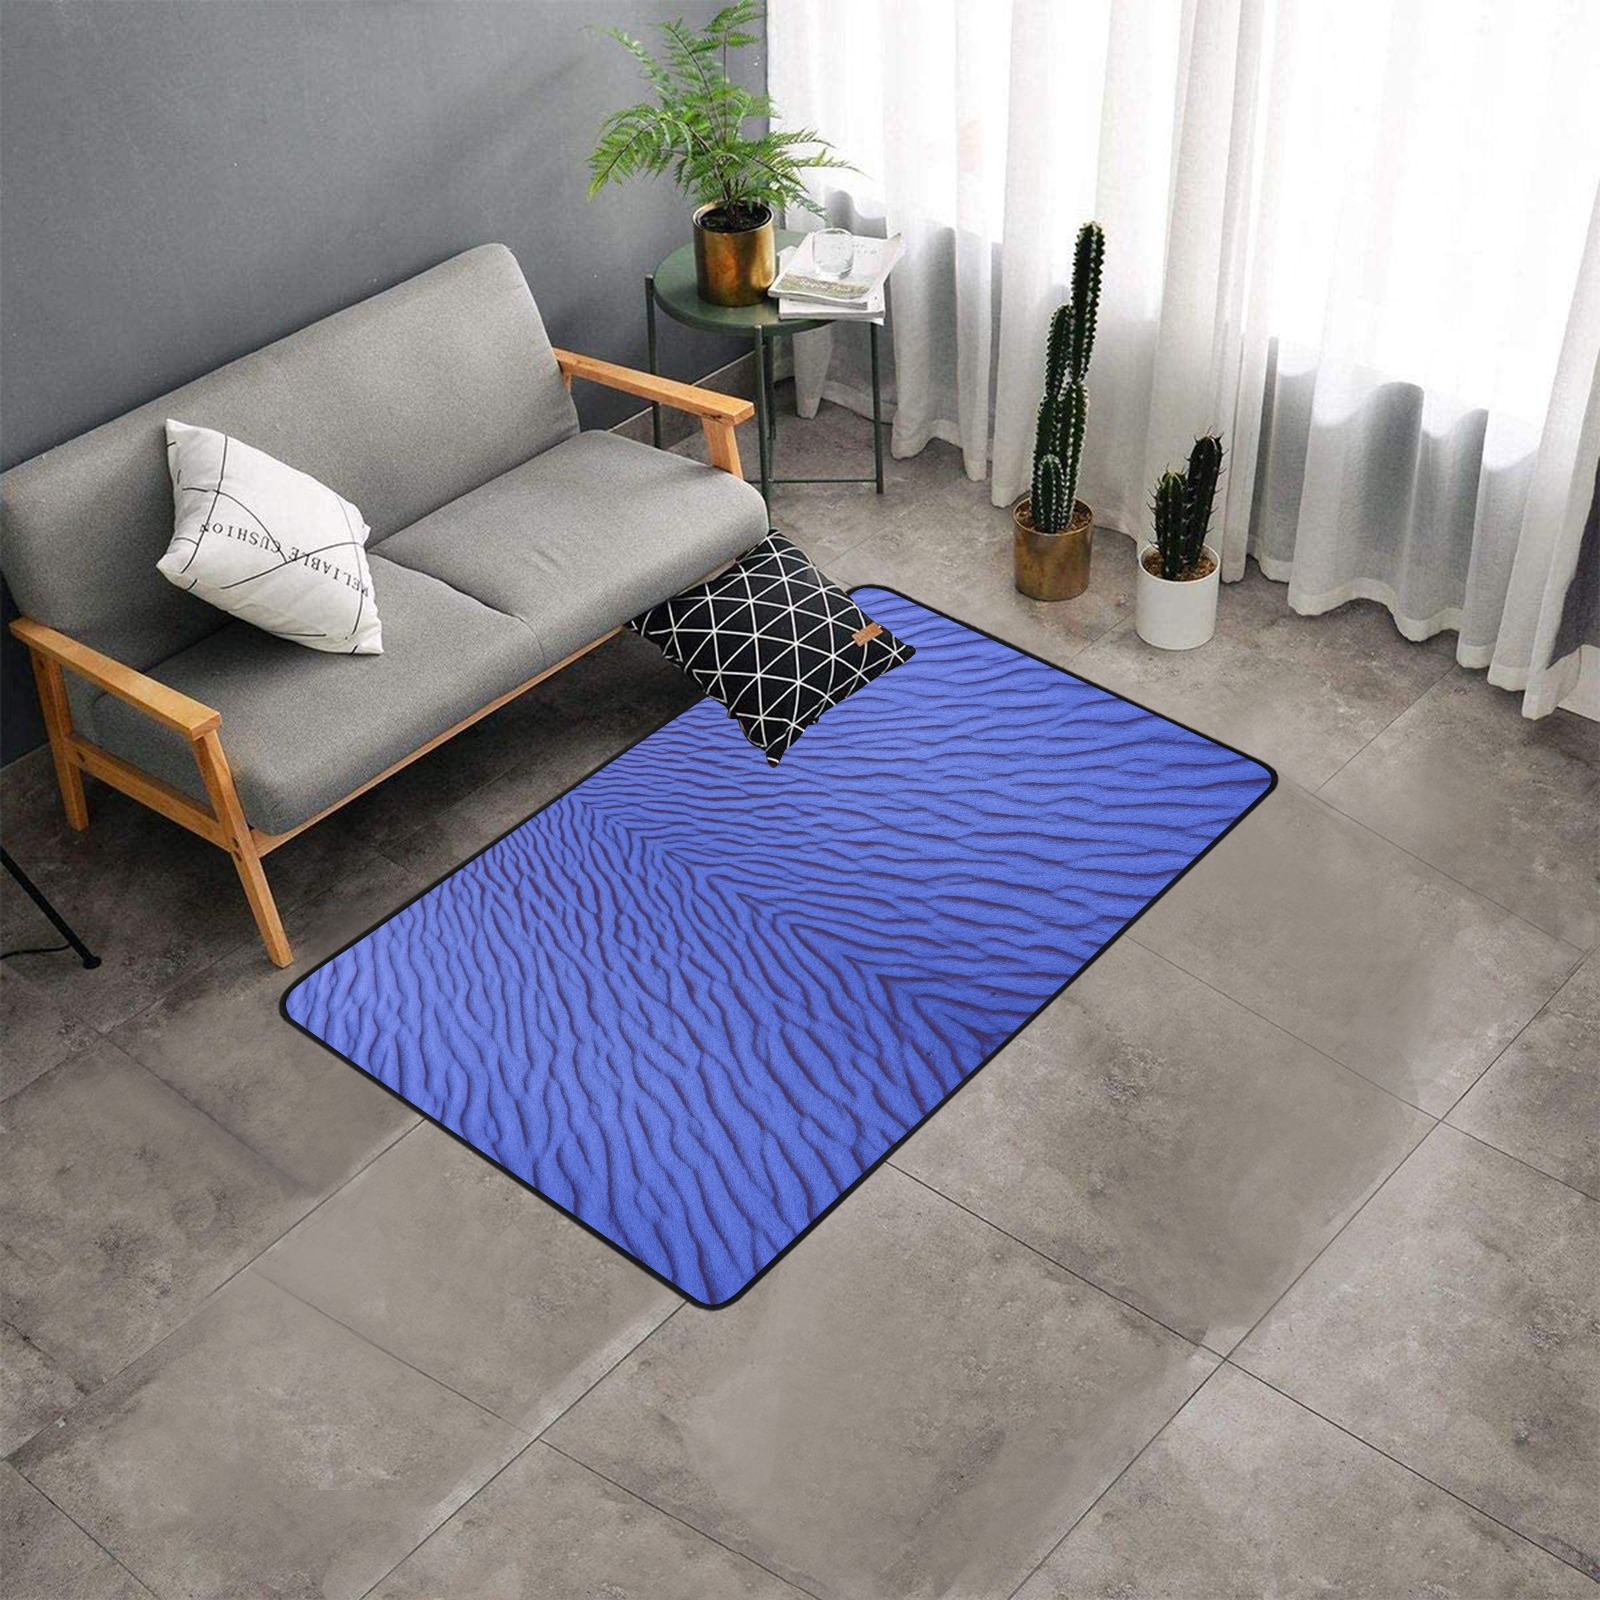 sand -blue Area Rug with Black Binding 5'x3'3''